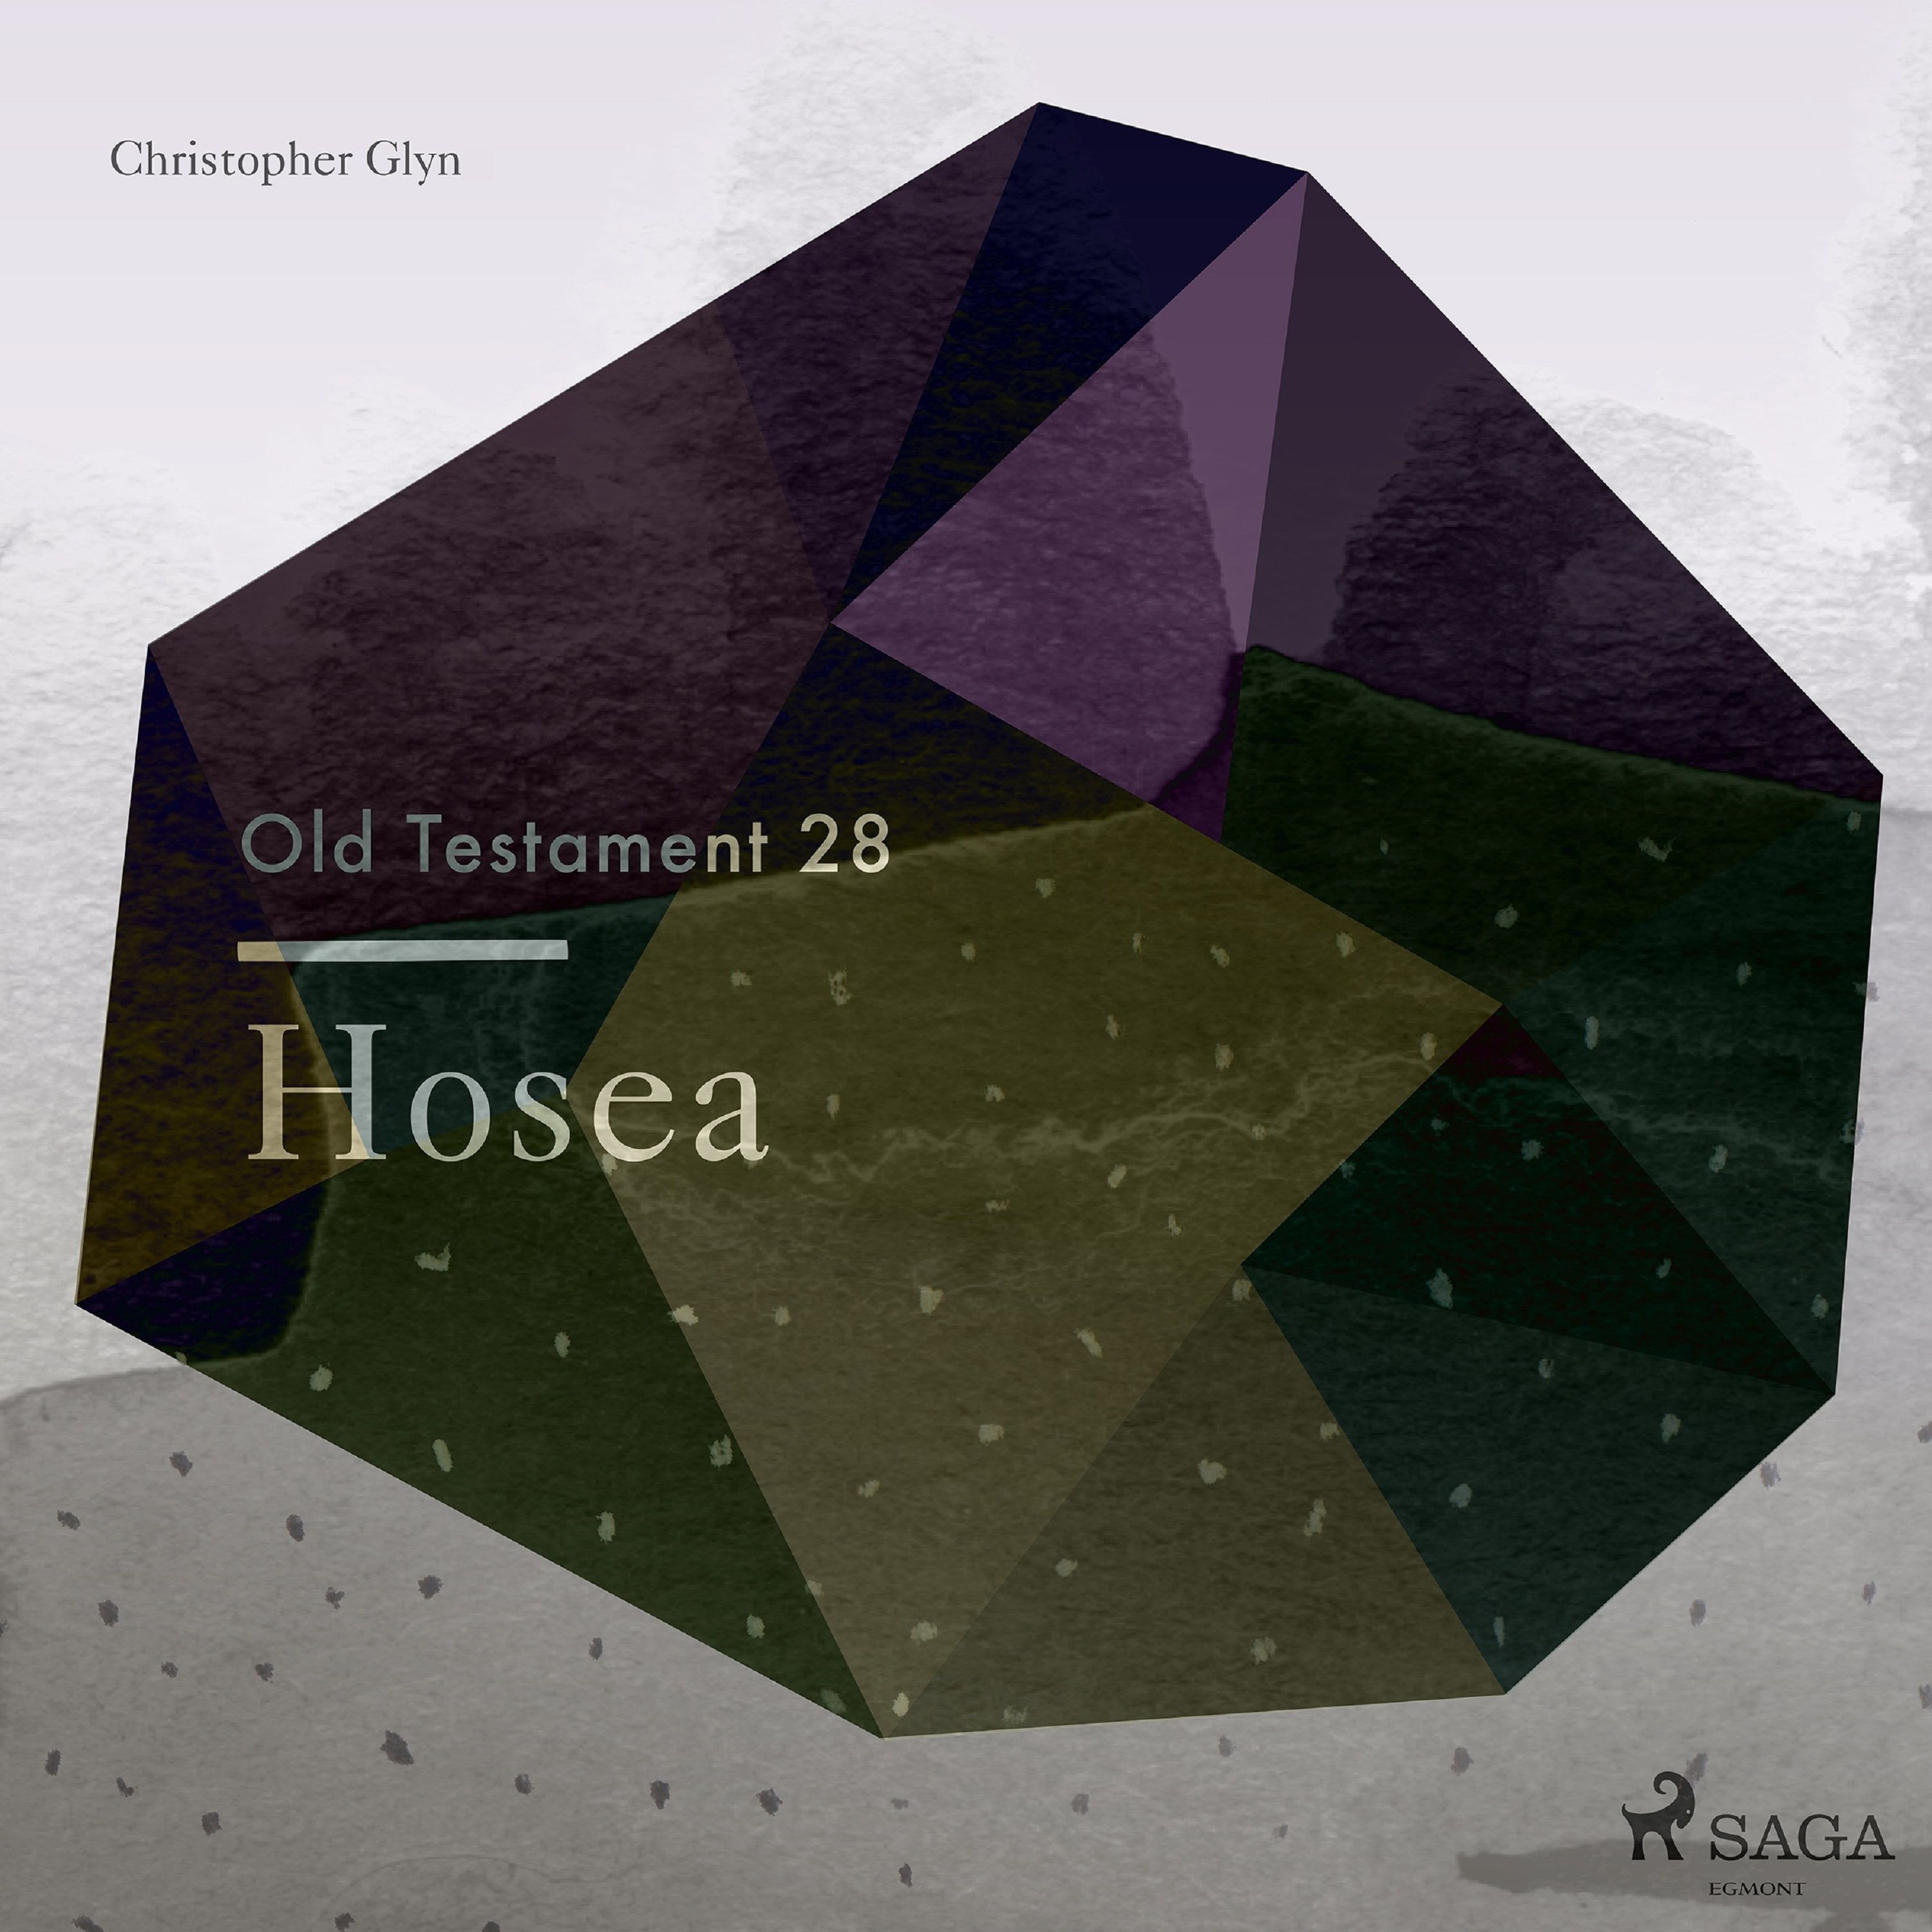 The Old Testament 28 - Hosea, audiobook by Christopher Glyn